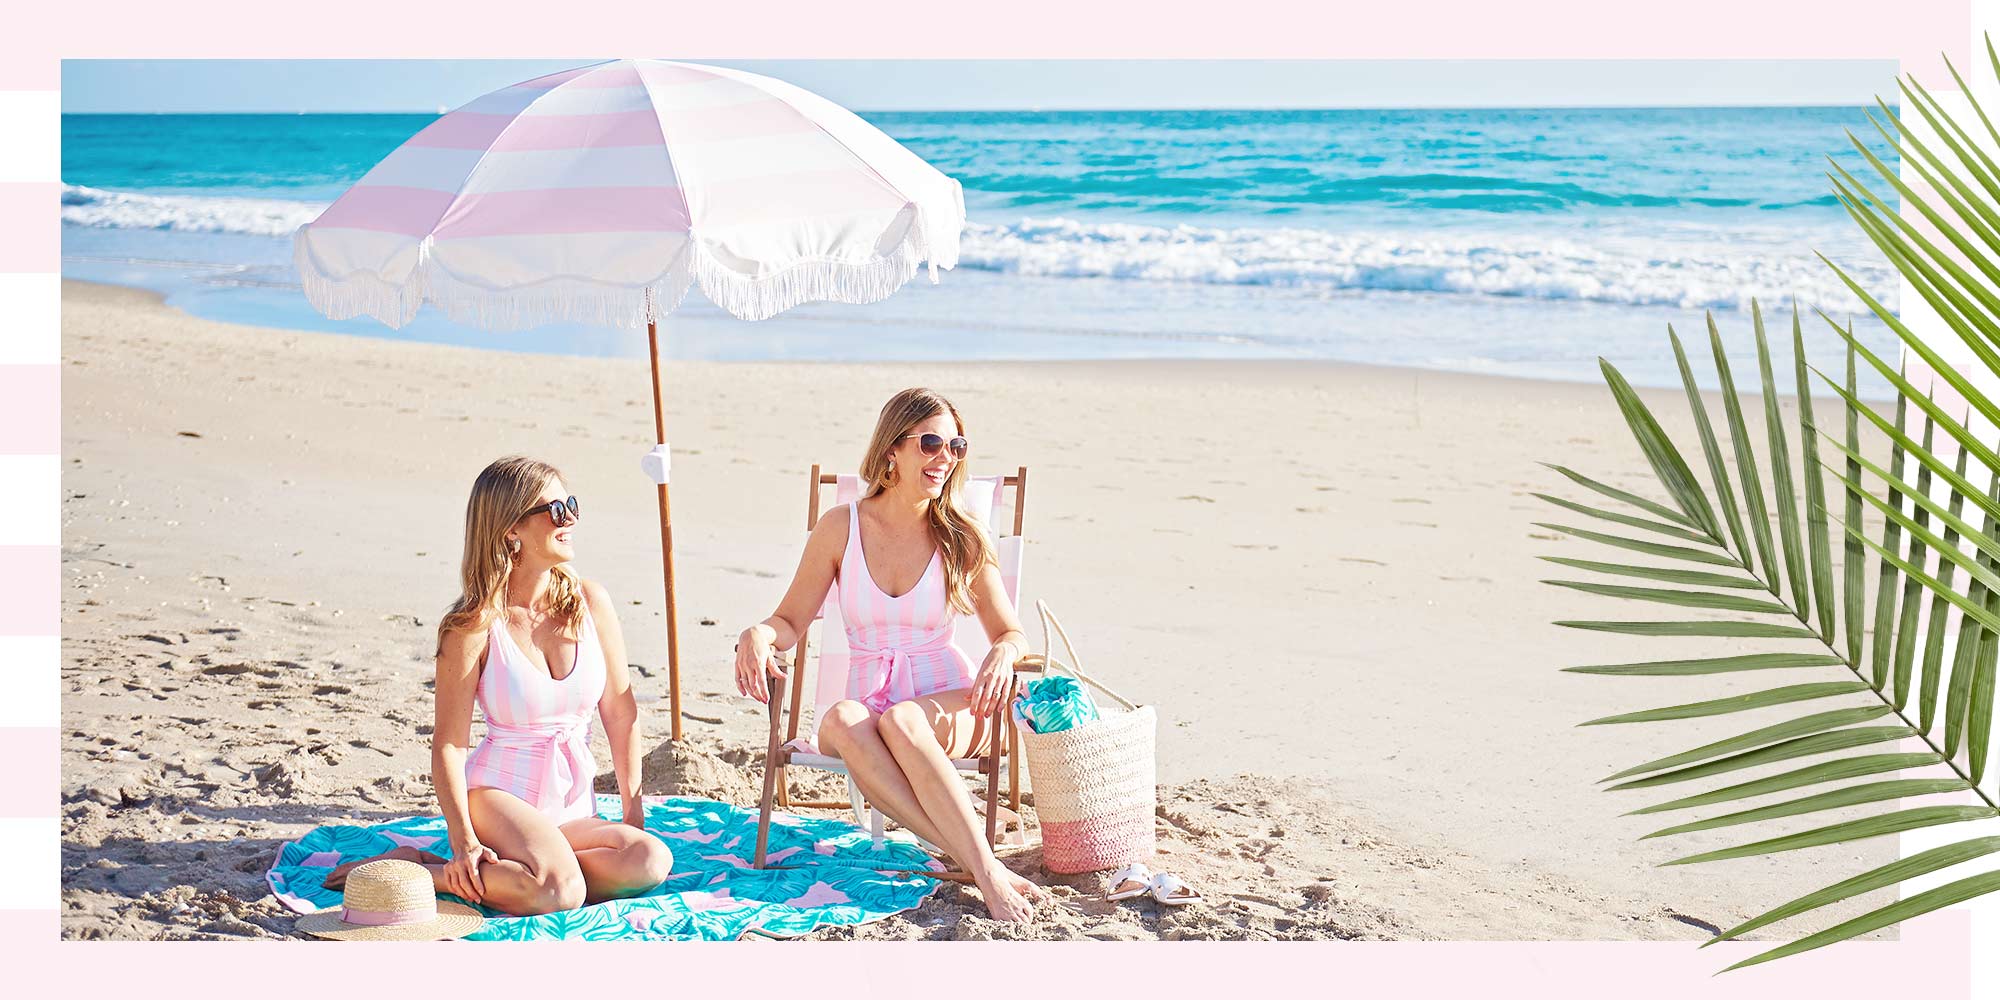 Fashion: vineyard vines x Palm Beach Lately's new collection is here!